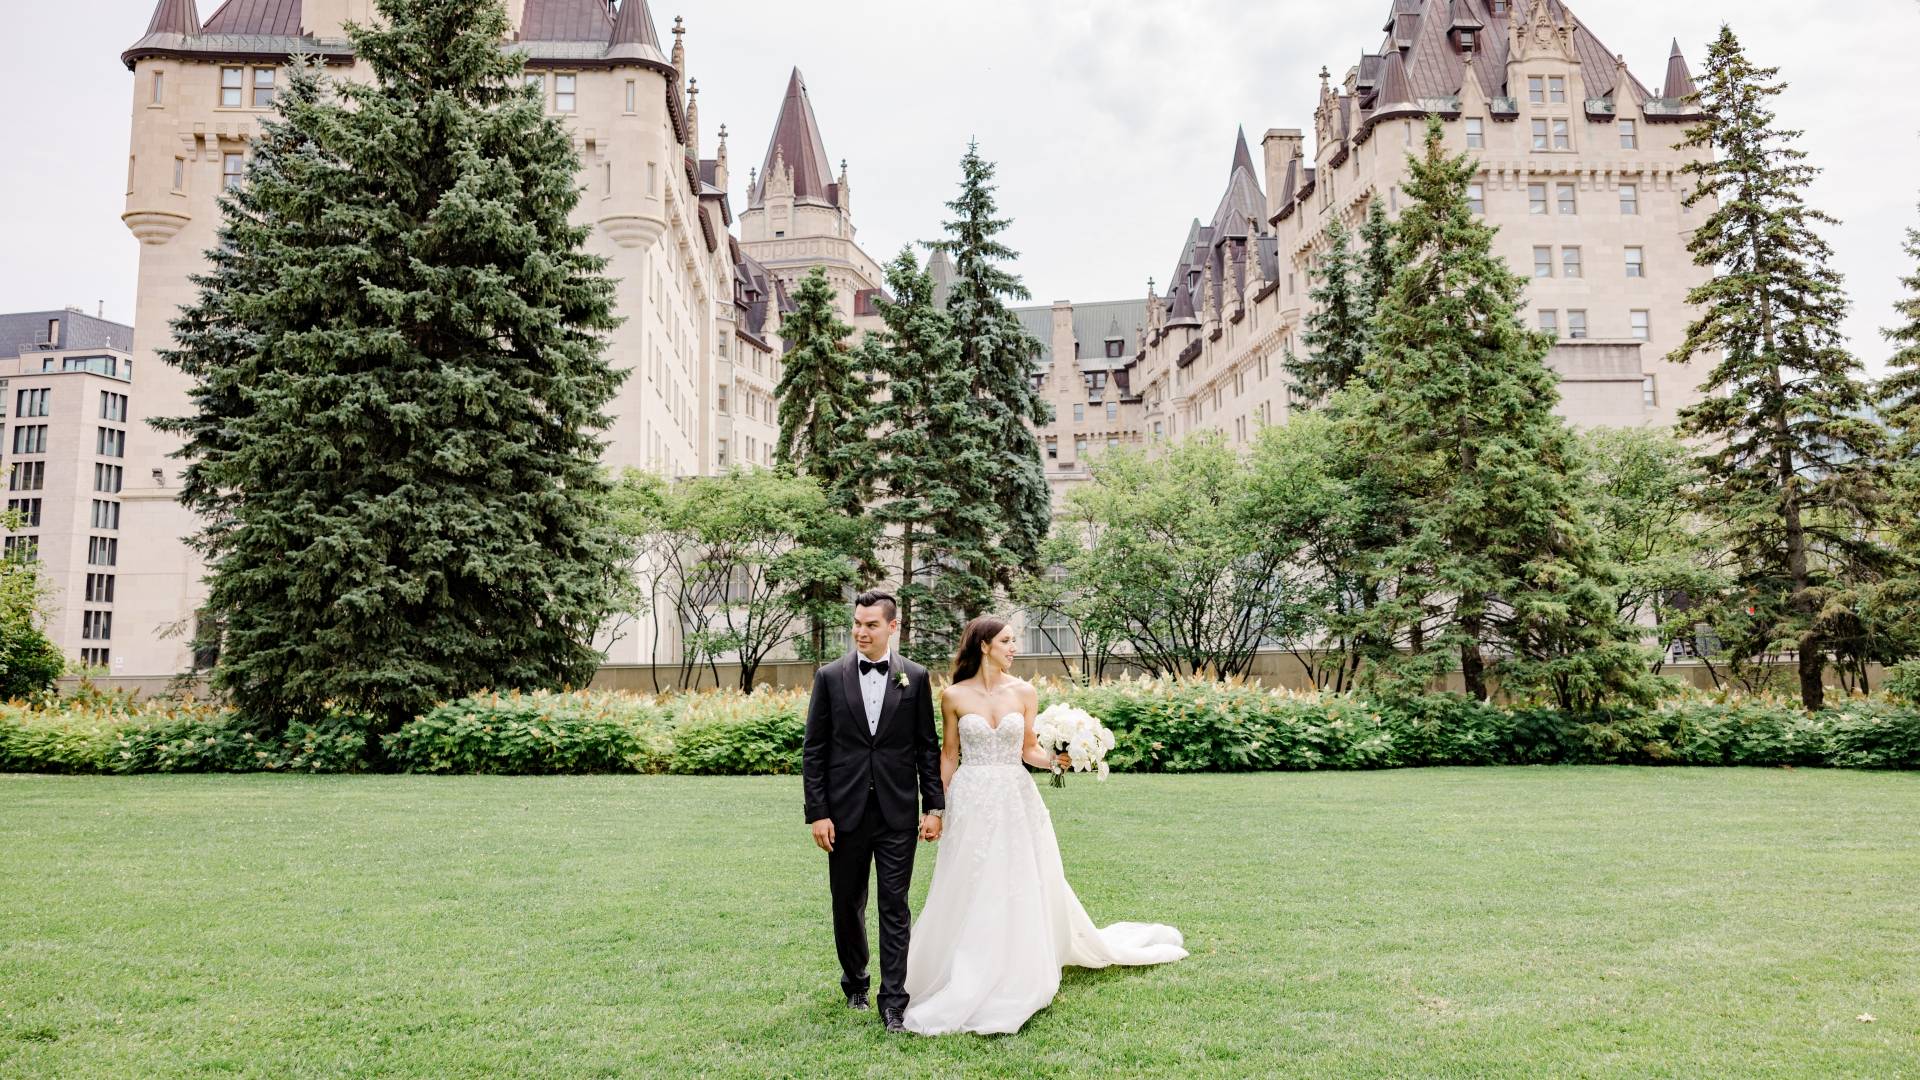 Joyful Bride and Groom after being married | Chateau Laurier | Grey Loft Studio